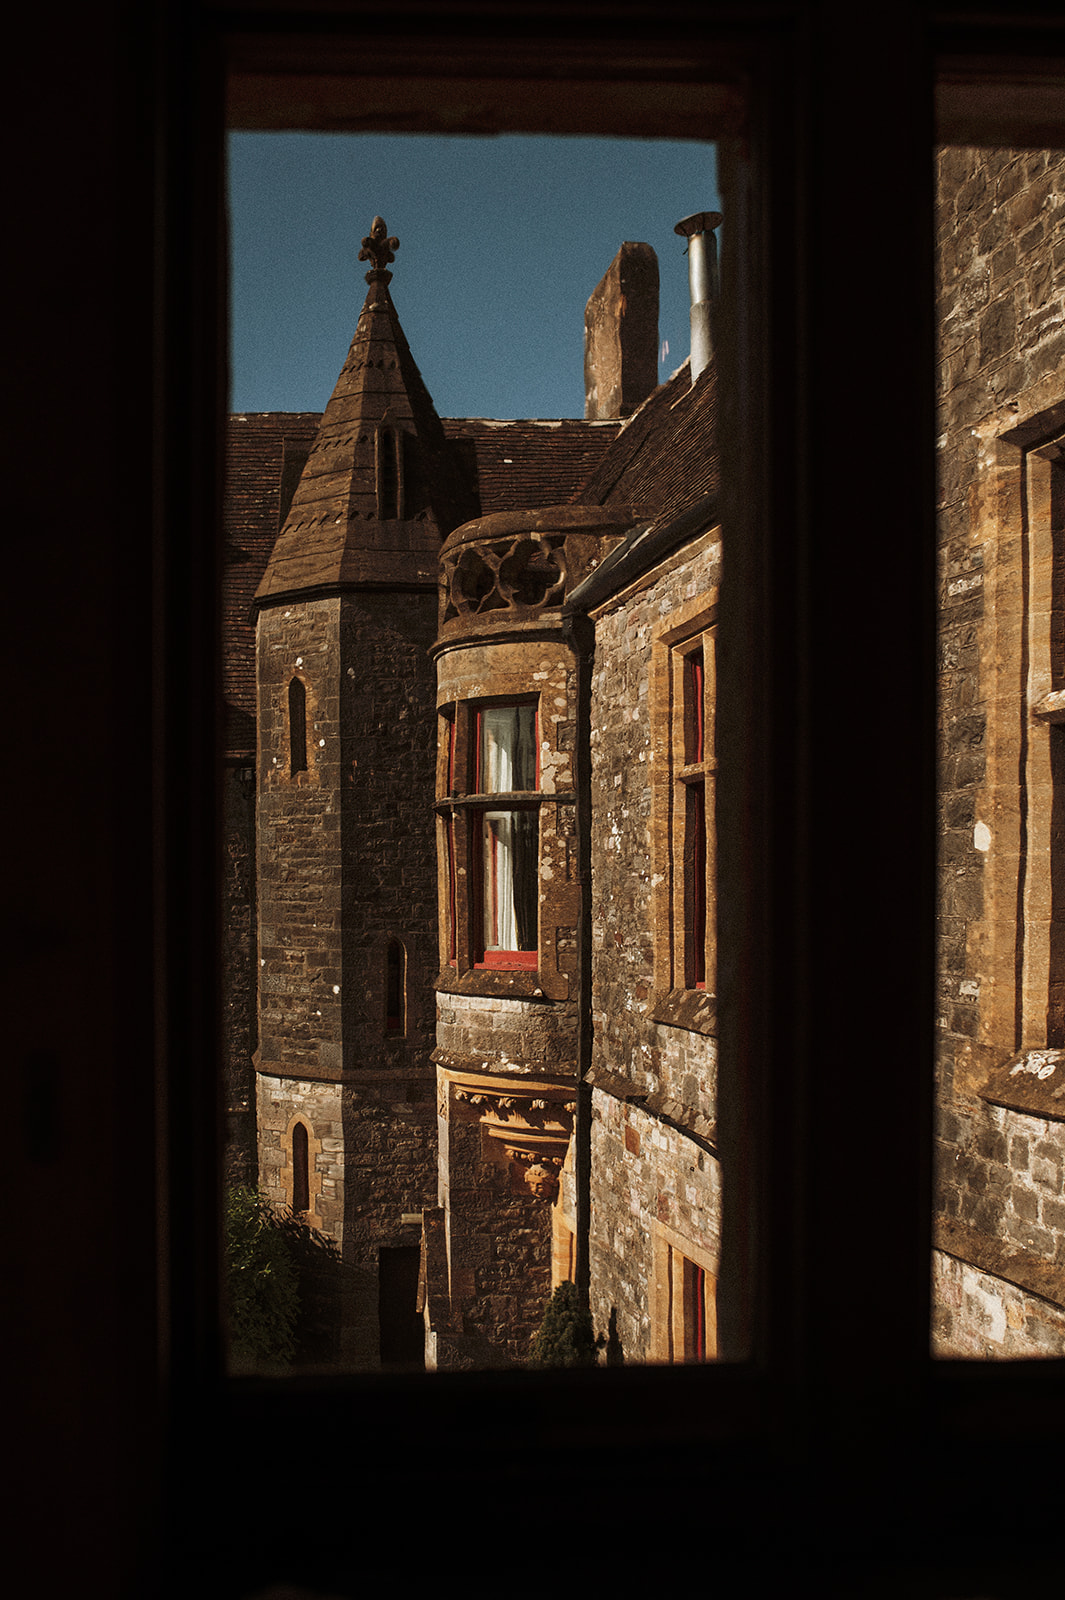 view from room in Huntsham Court castle, England